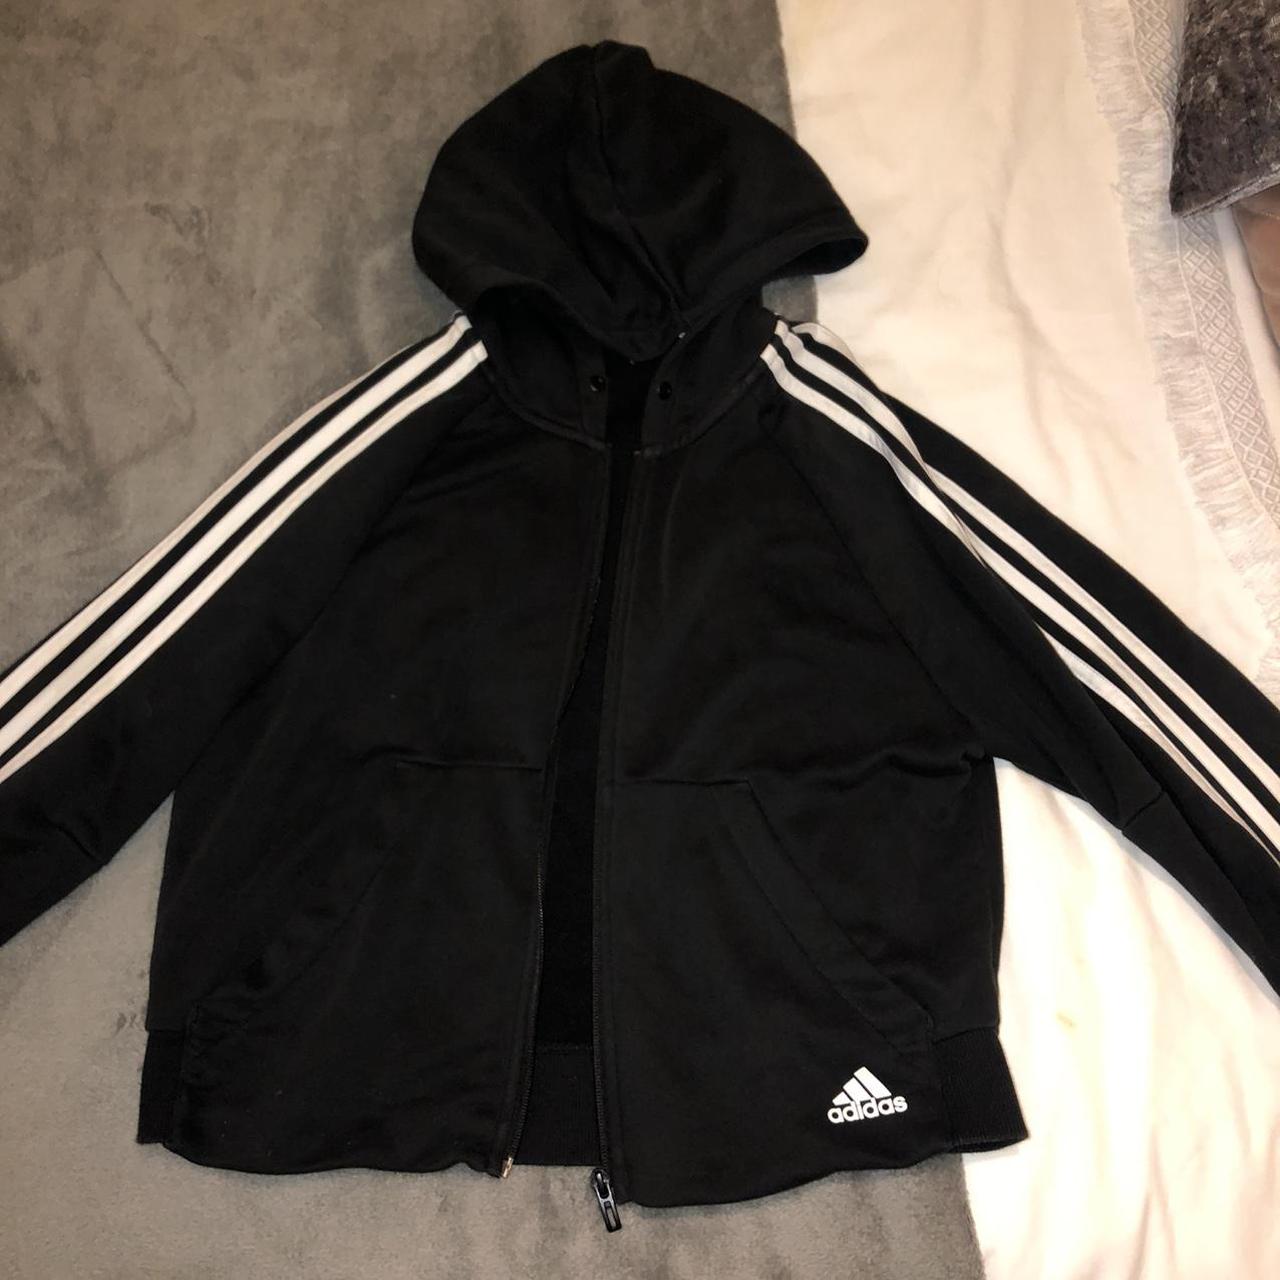 Black and white zip up hoodie from Adidas - UK size... - Depop